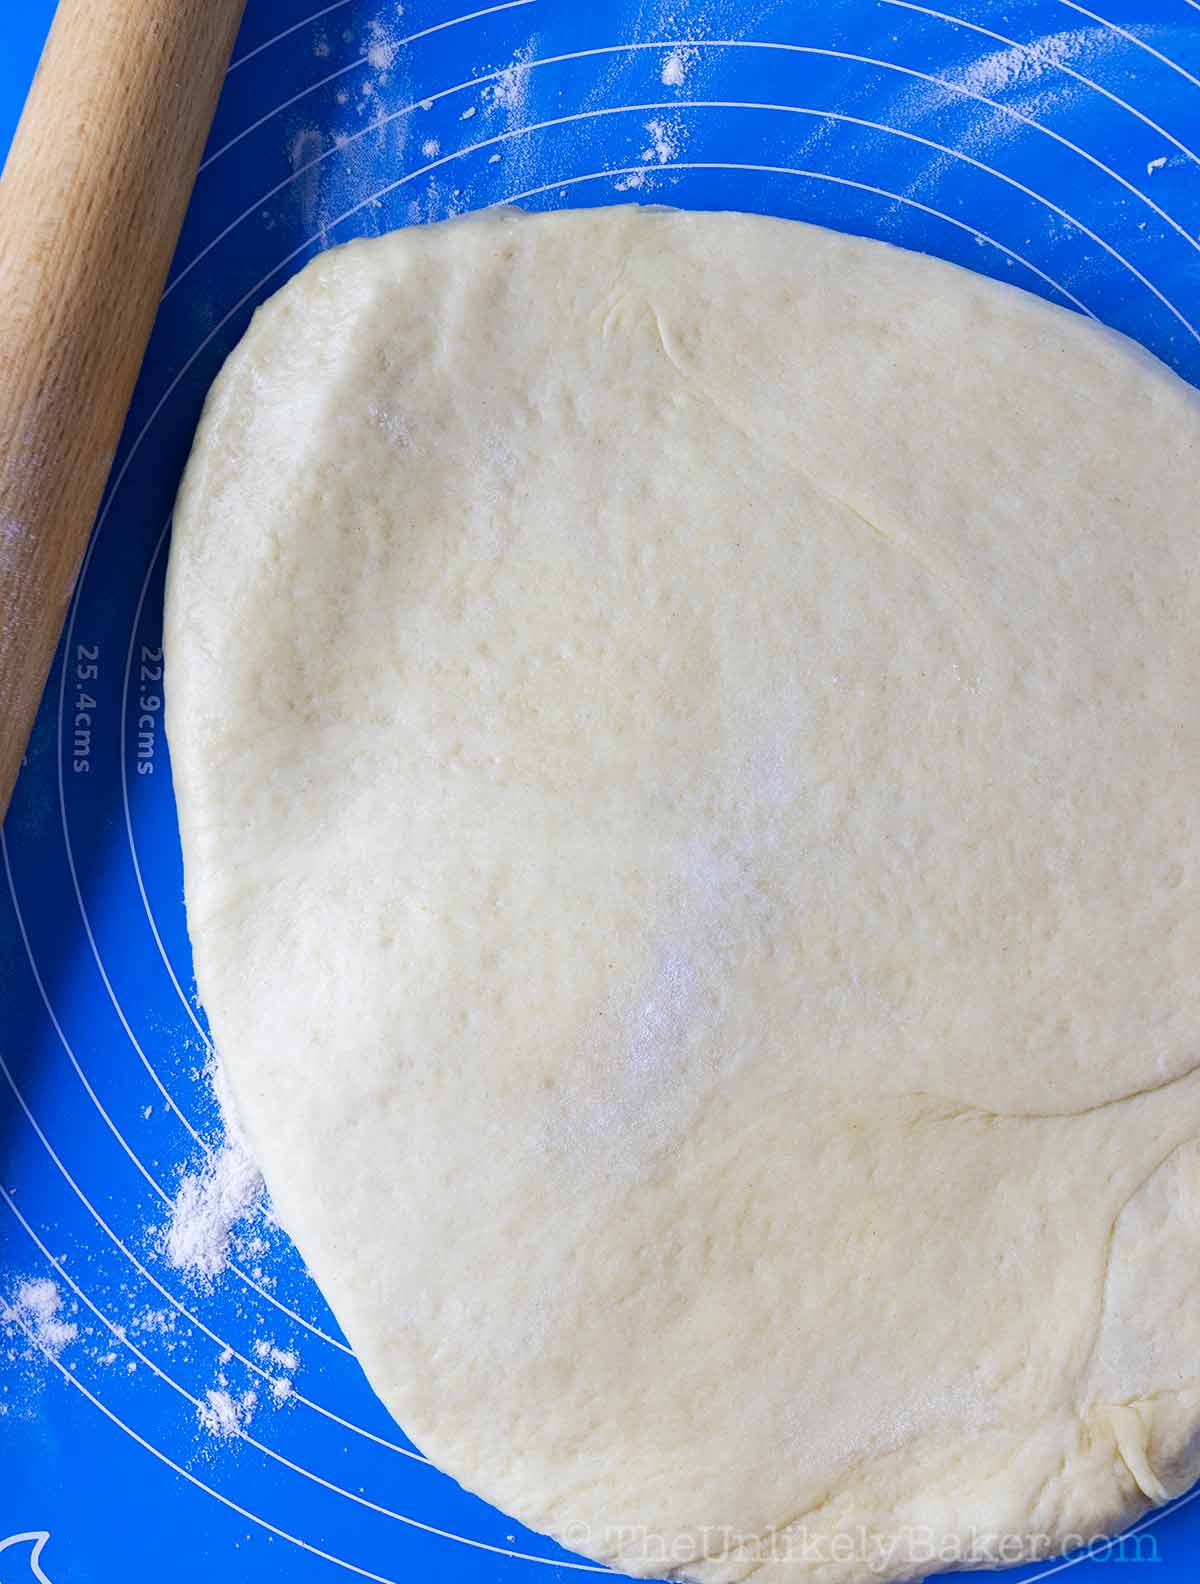 Bread dough slightly flattened with a rolling pin.